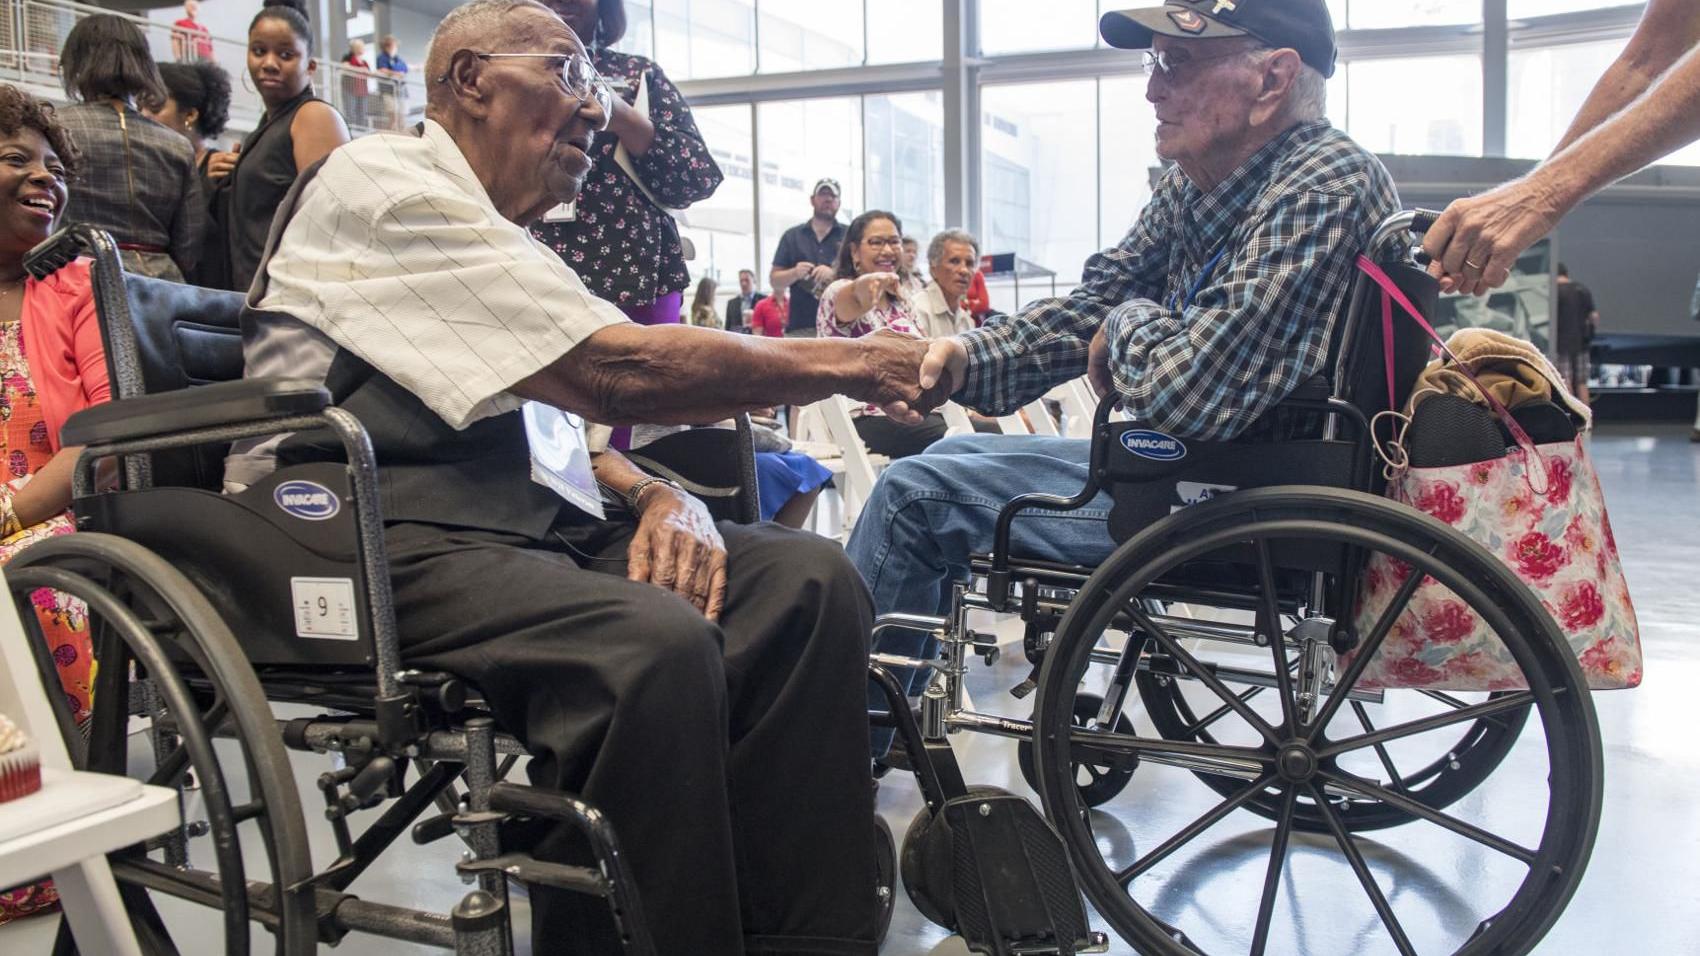 Photos: 110-year-old World War II veteran gets covered with kisses on his birthday at the WWII Museum